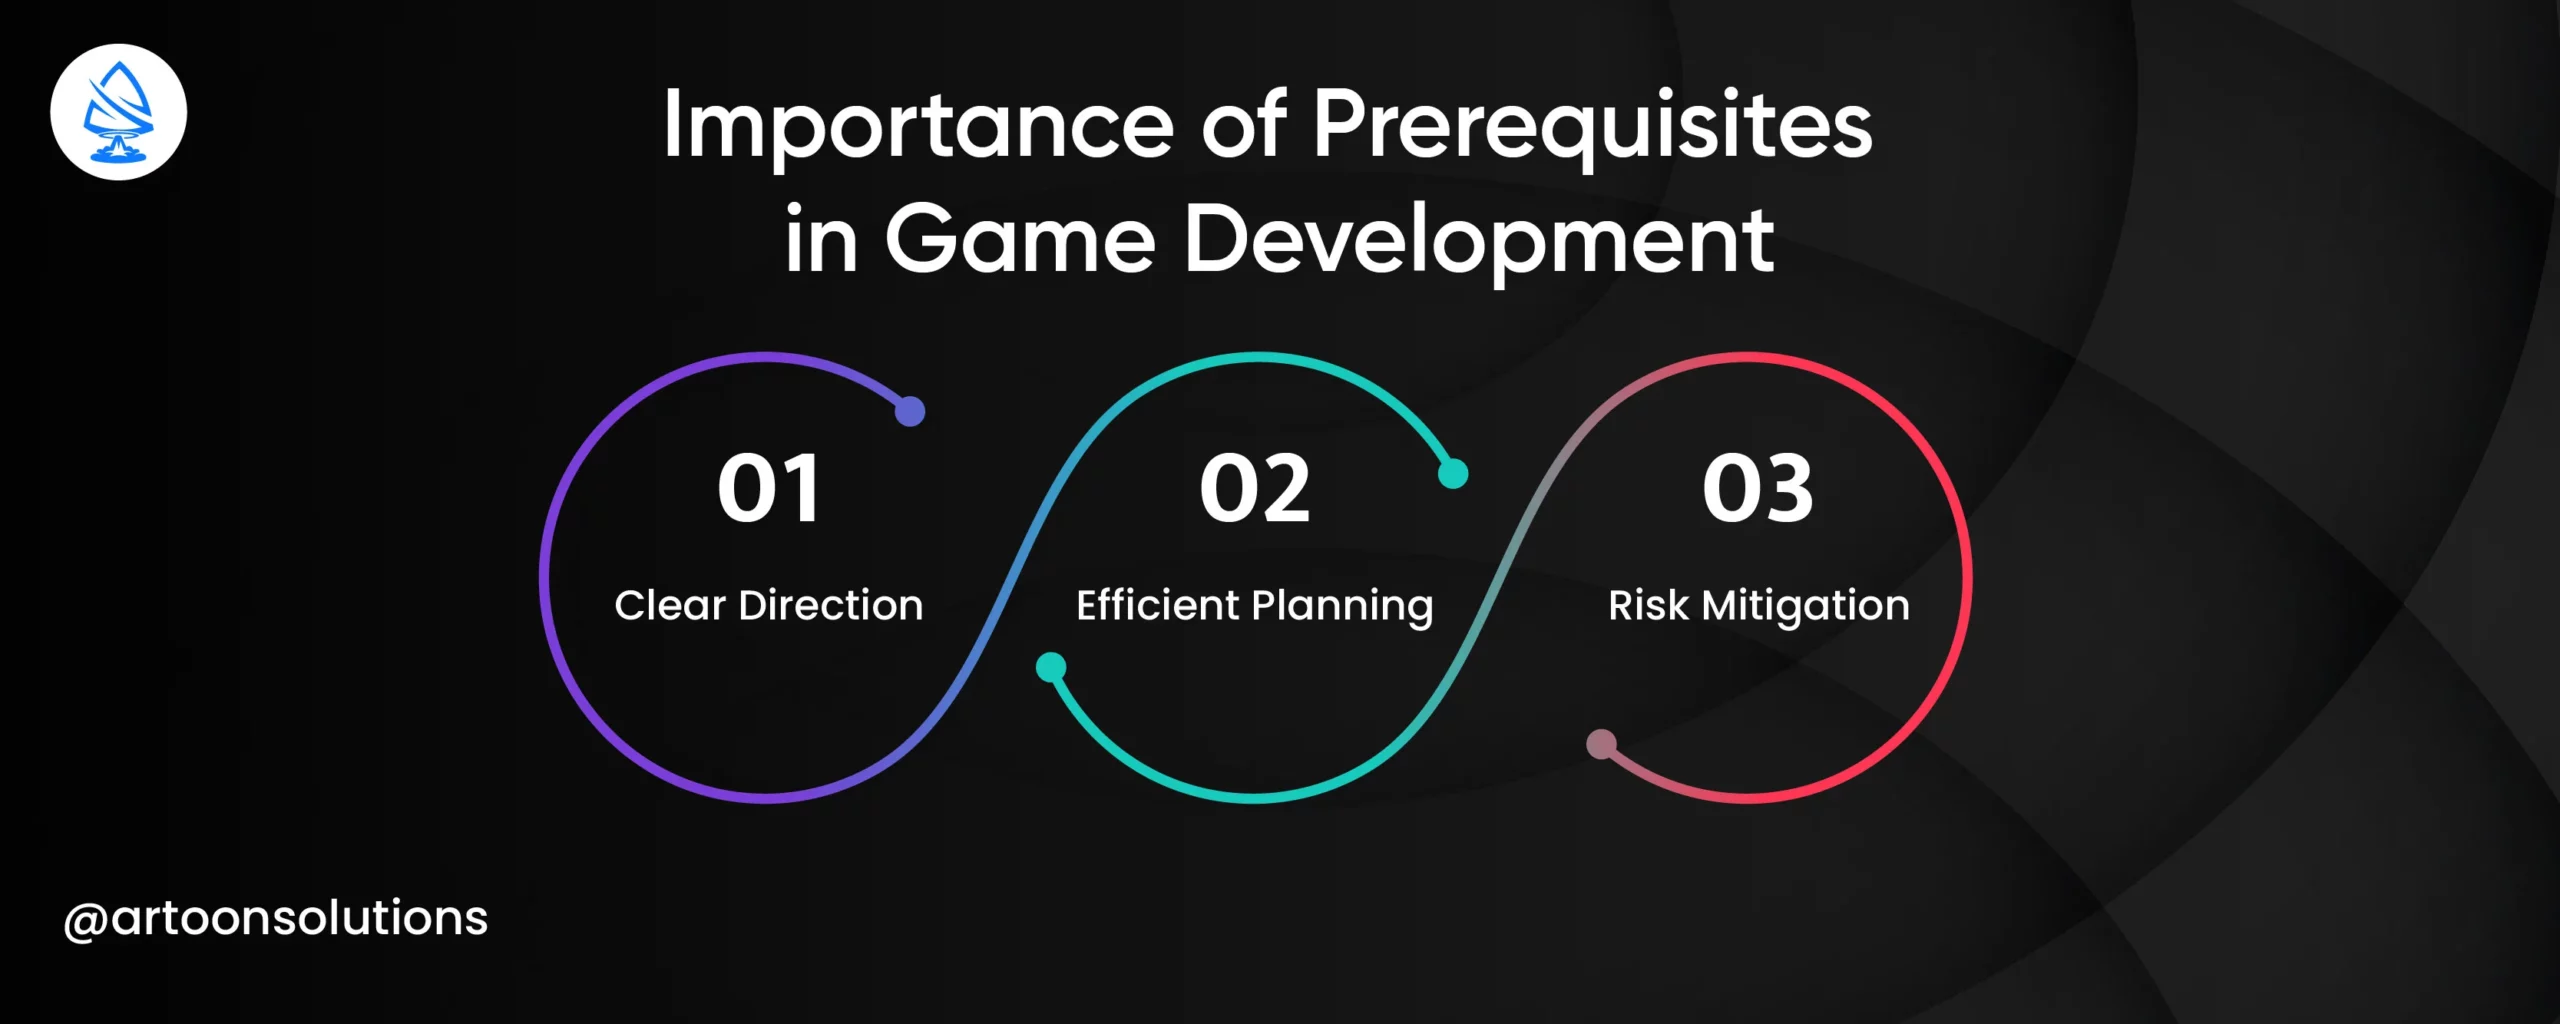 Importance of Prerequisites in Game Development card games in unity